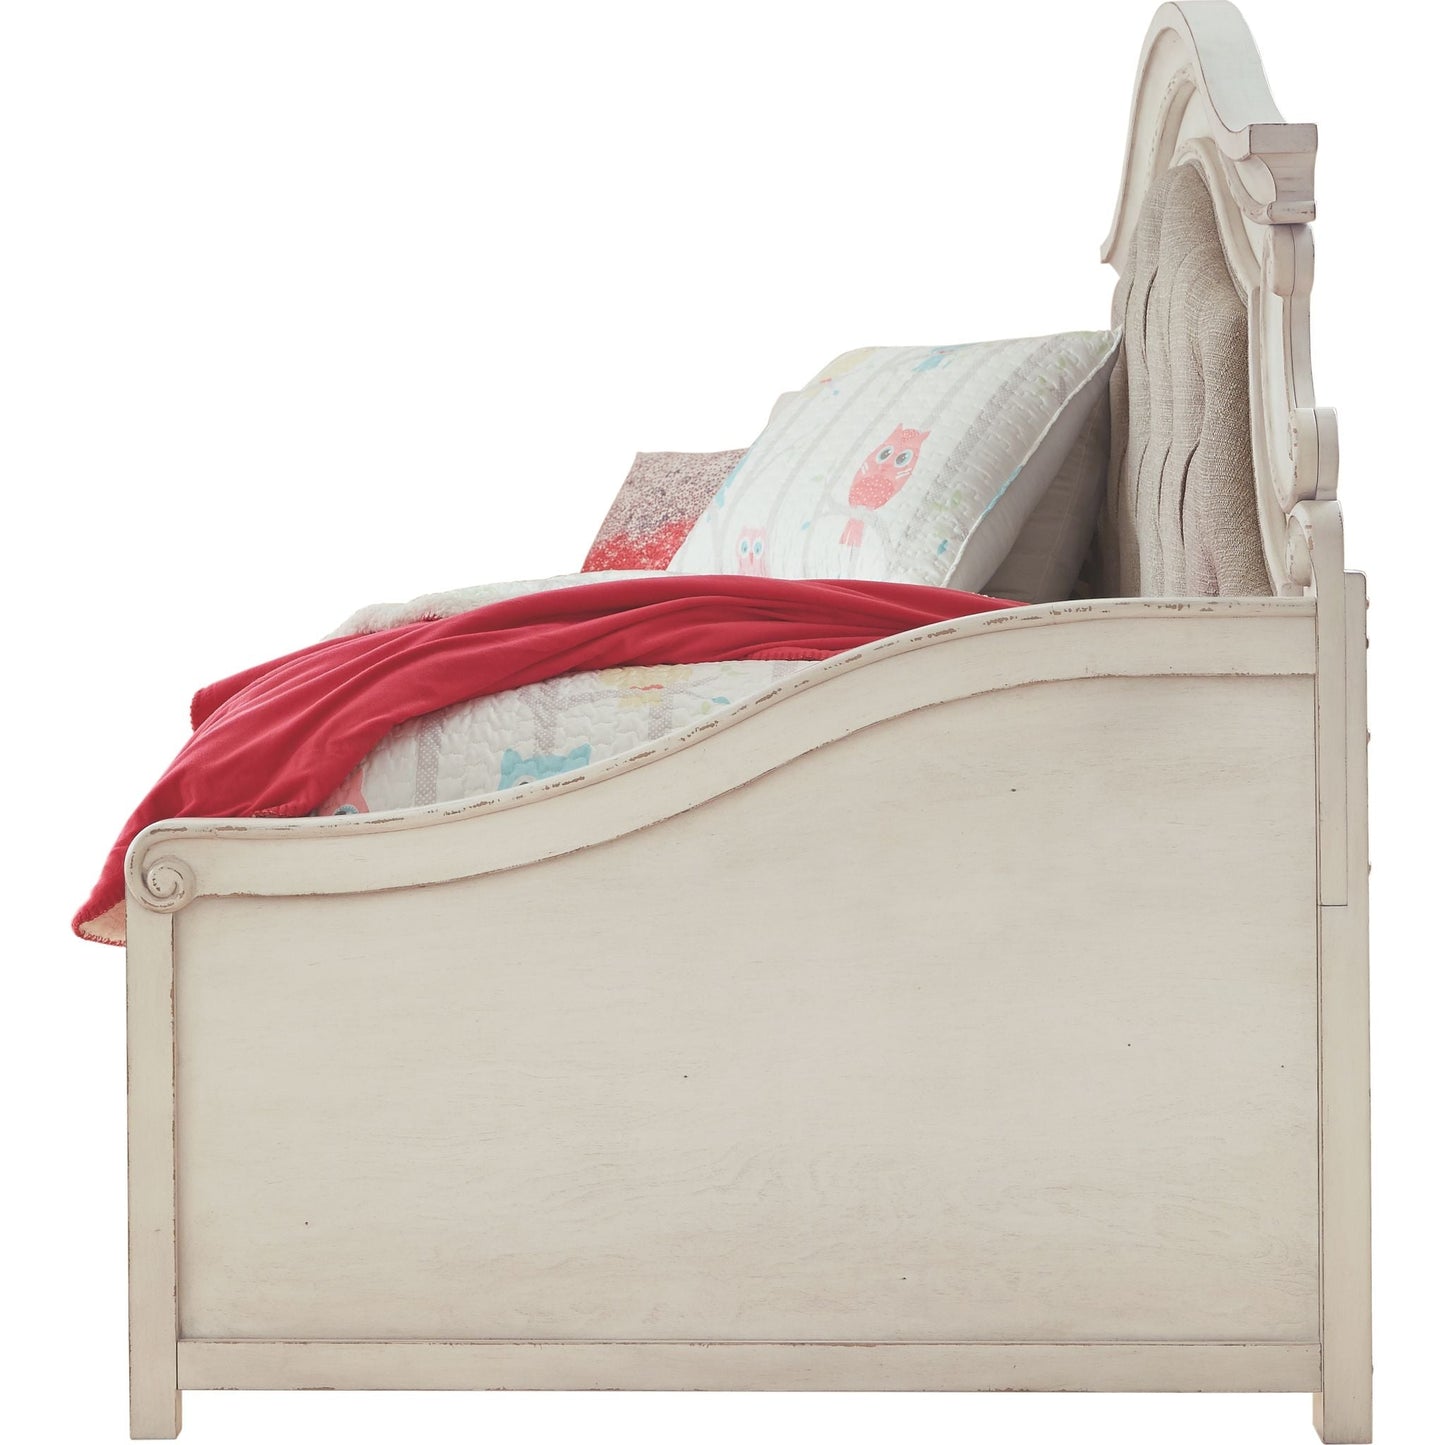 Realyn Twin Daybed - Chipped White